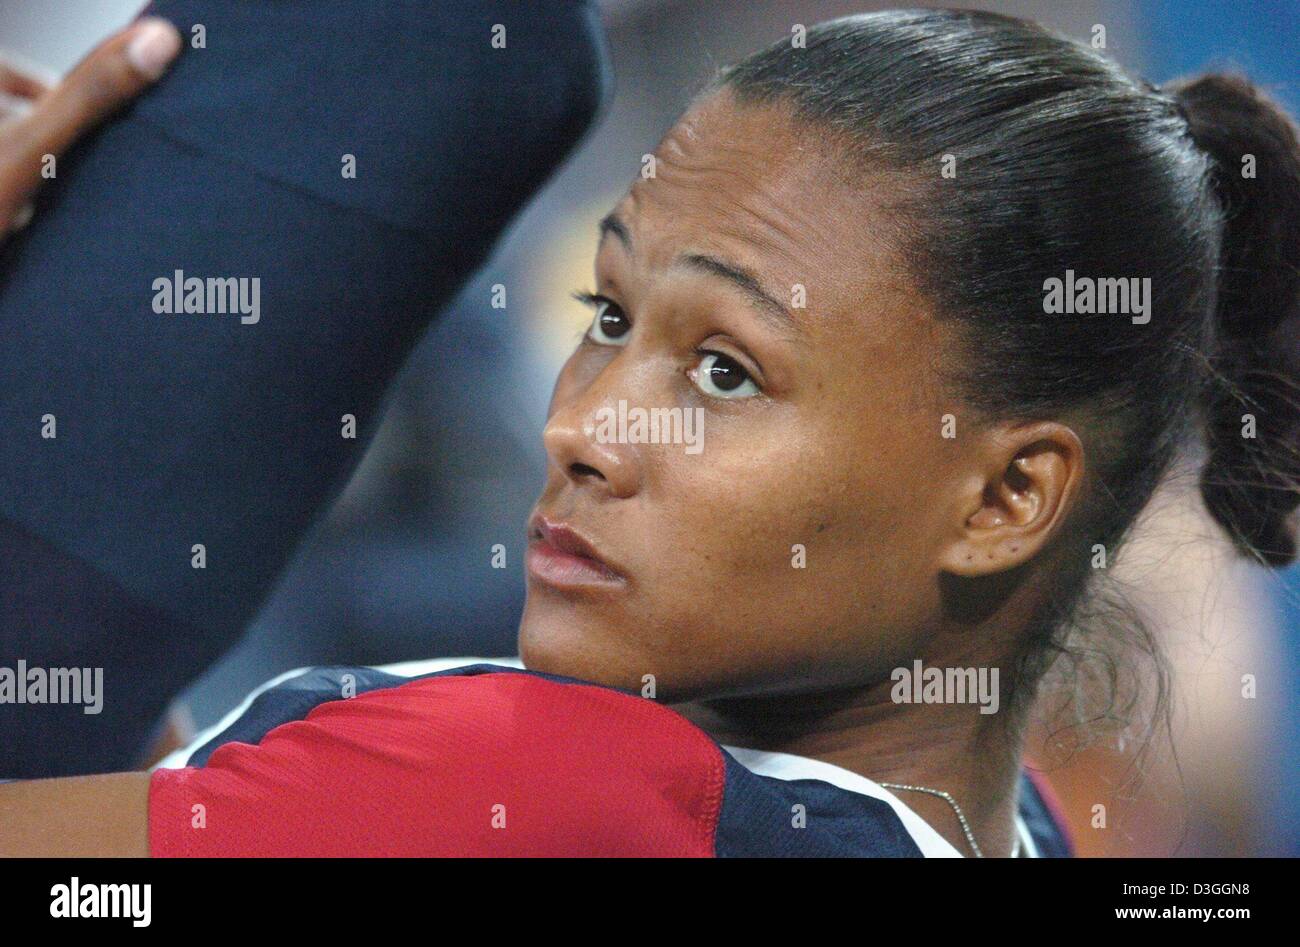 (dpa) - Marion Jones from the USA concentrates before her start in the women's 4x100m relay qualifying heat in the Olympic stadium at the Athens 2004 Olympic Games, Thursday 26 August 2004. Stock Photo